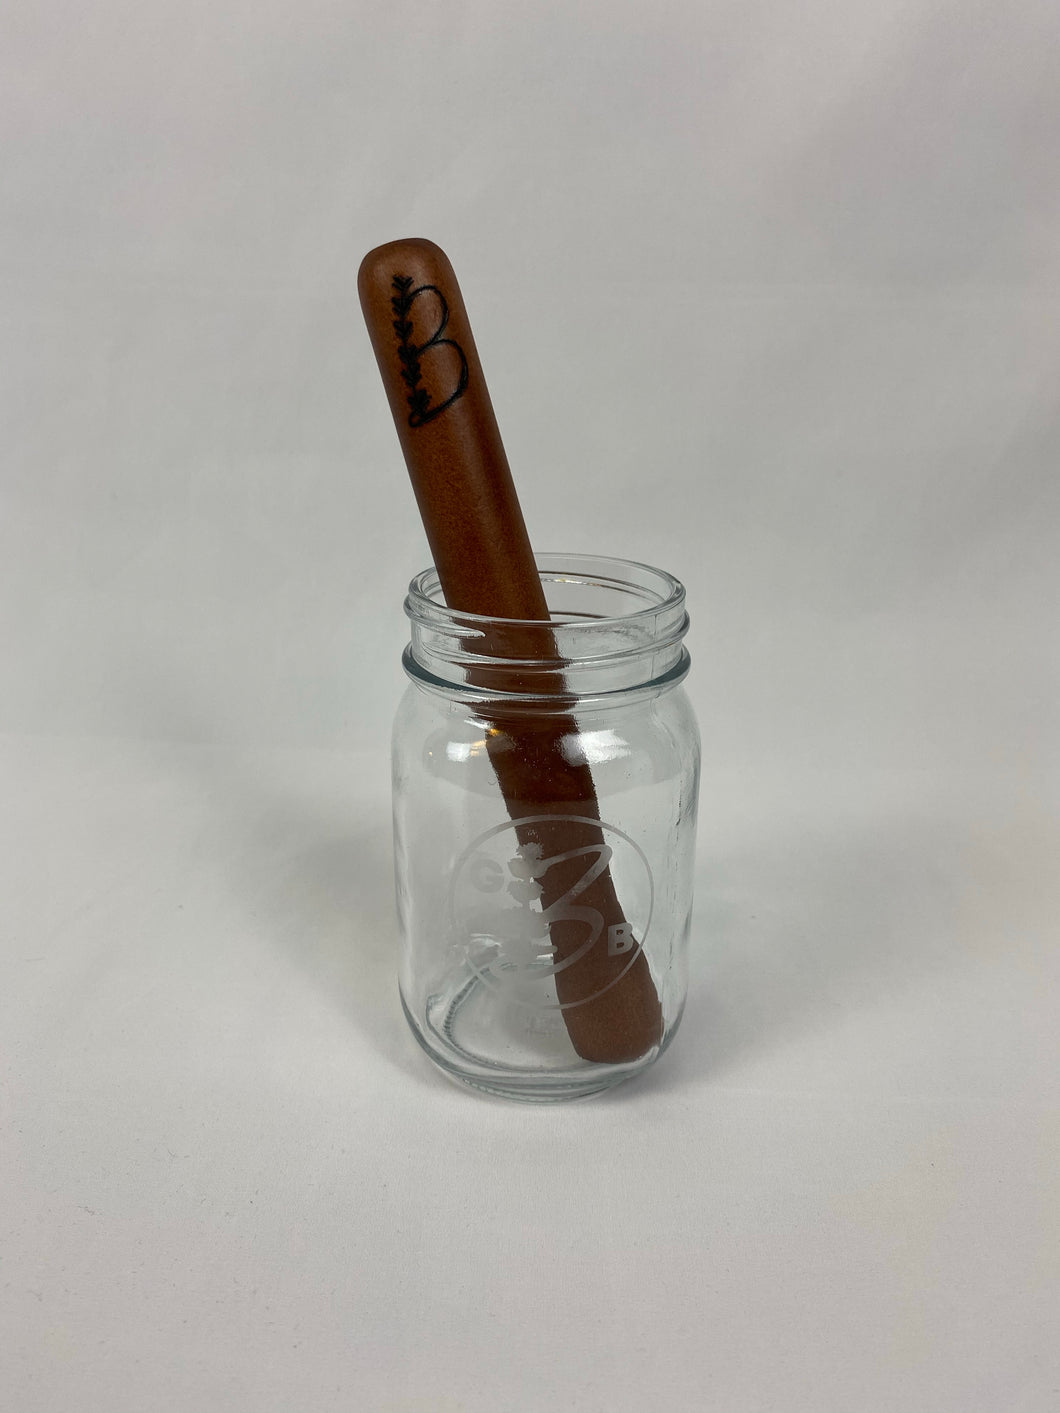 Muddler featuring logo wood burned by hand